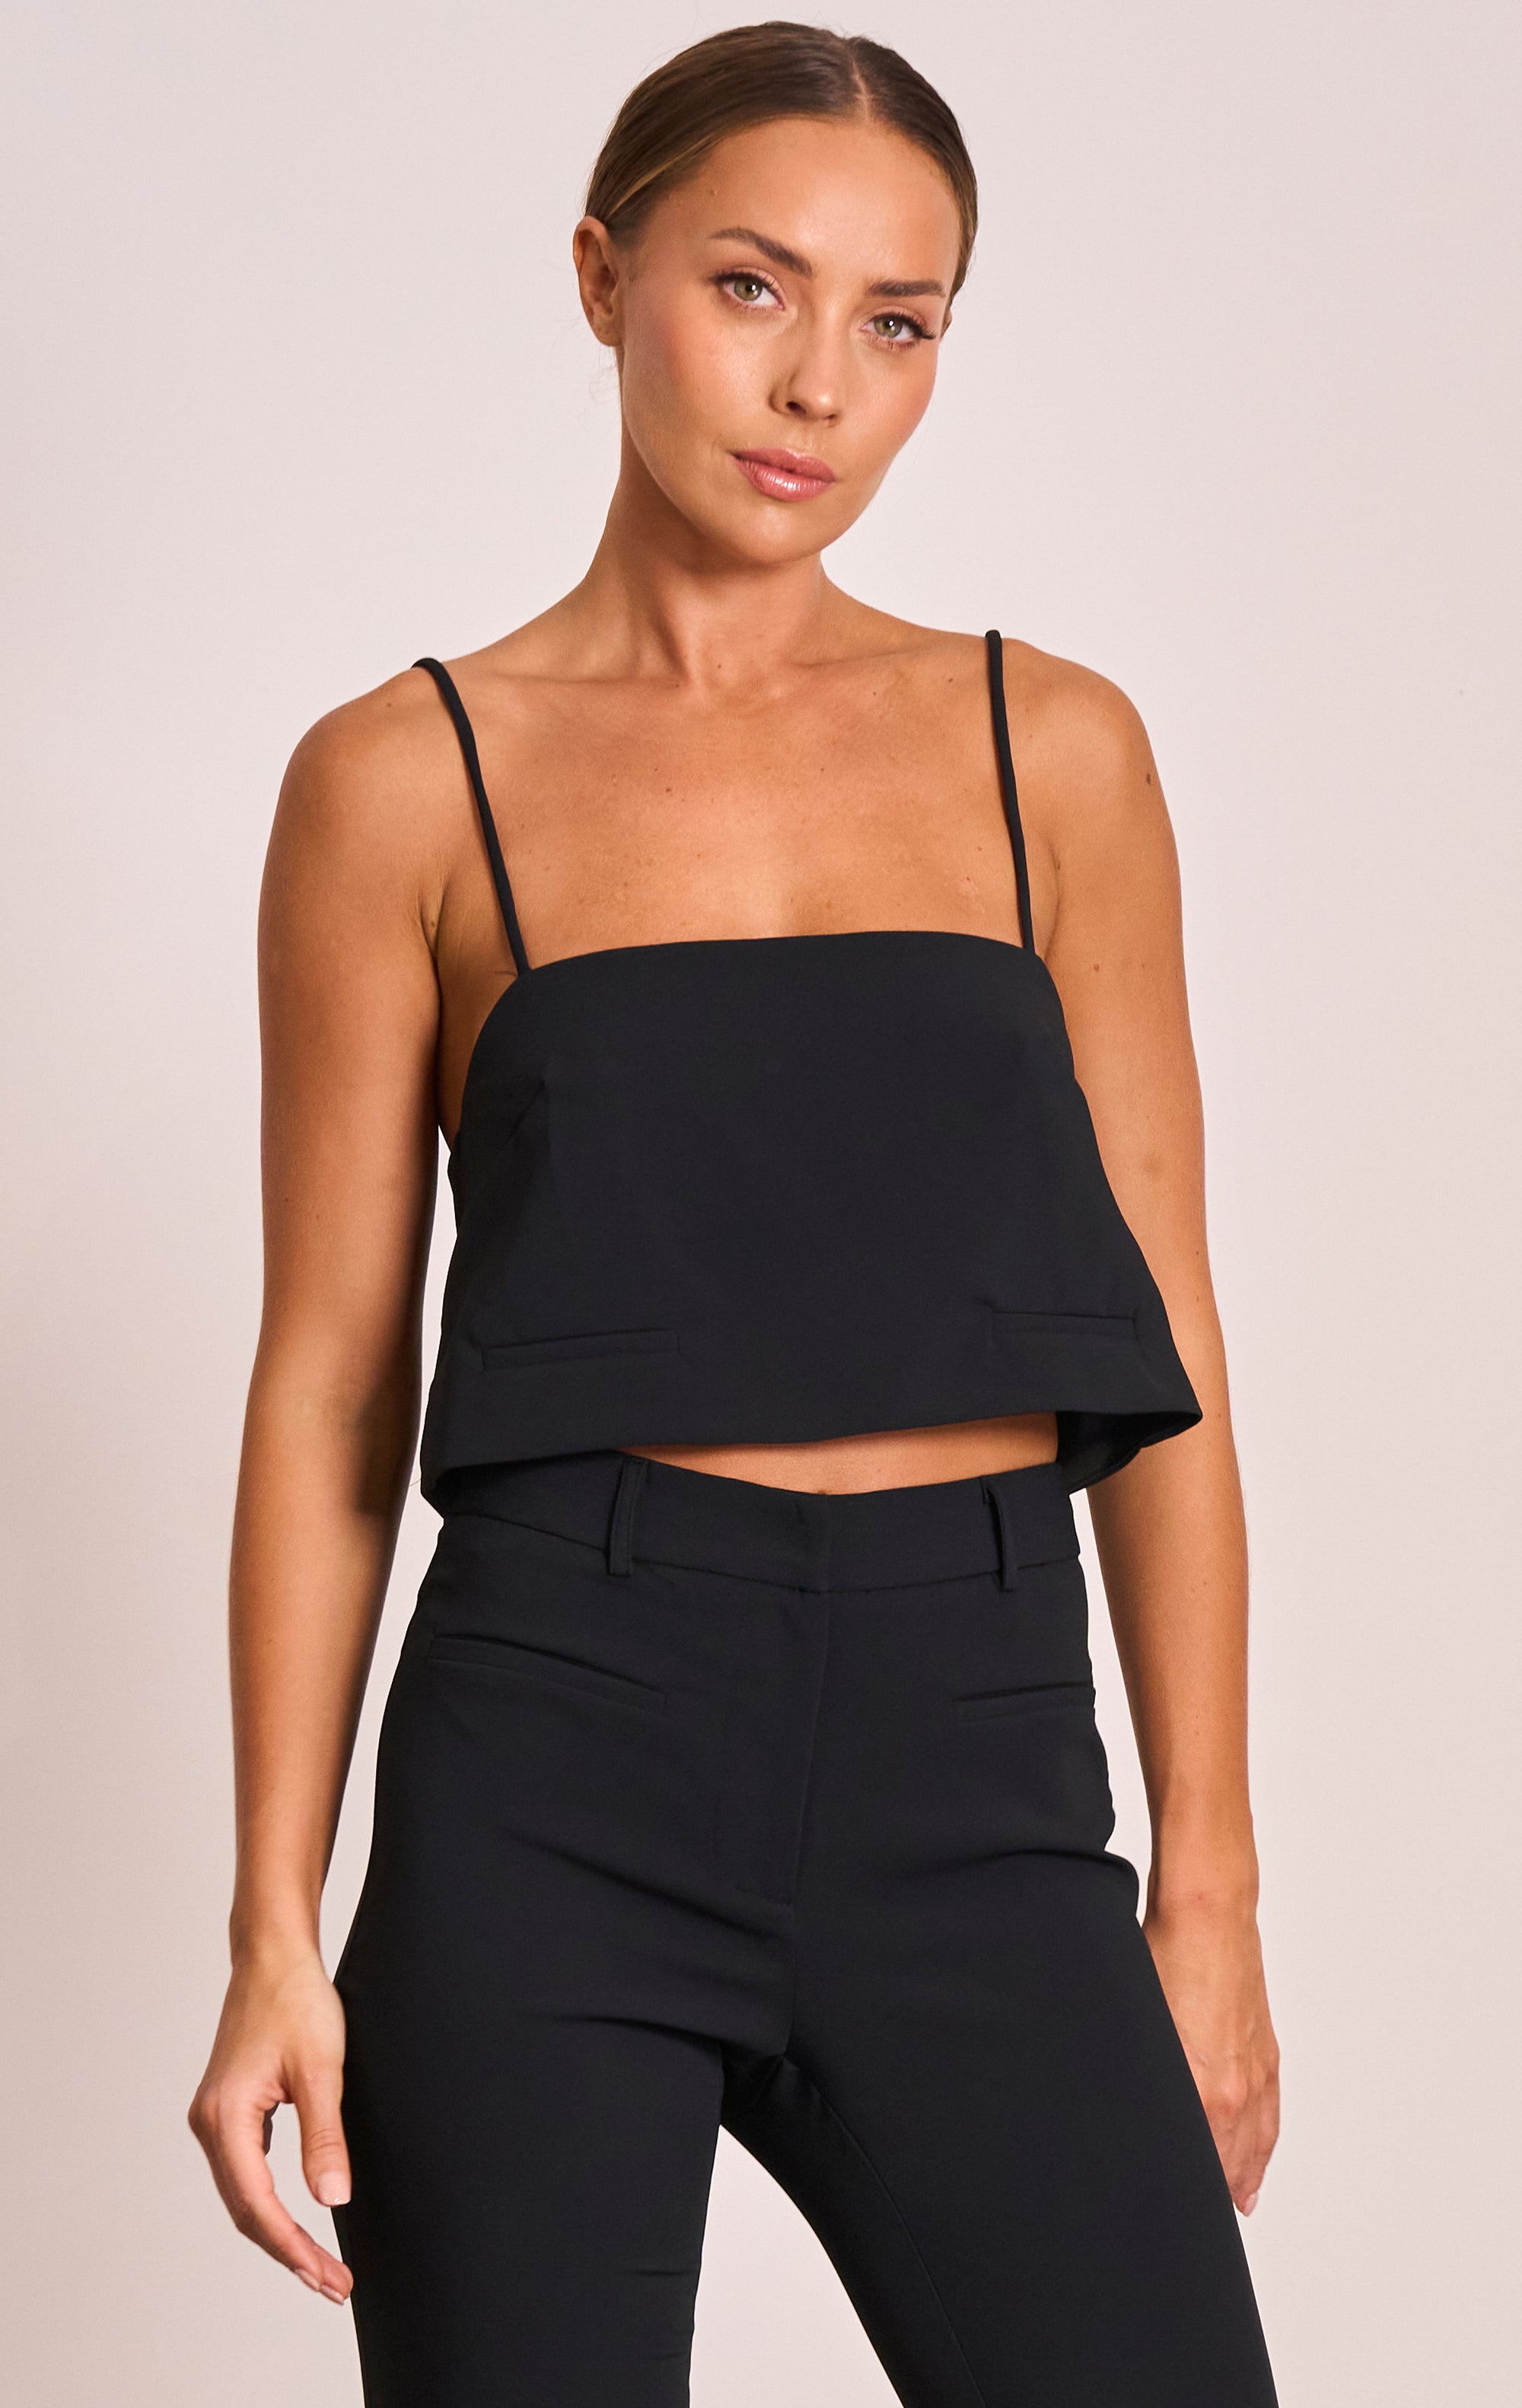 Yves Top - TAKE 40% OFF DISCOUNT APPLIED AT CHECKOUT